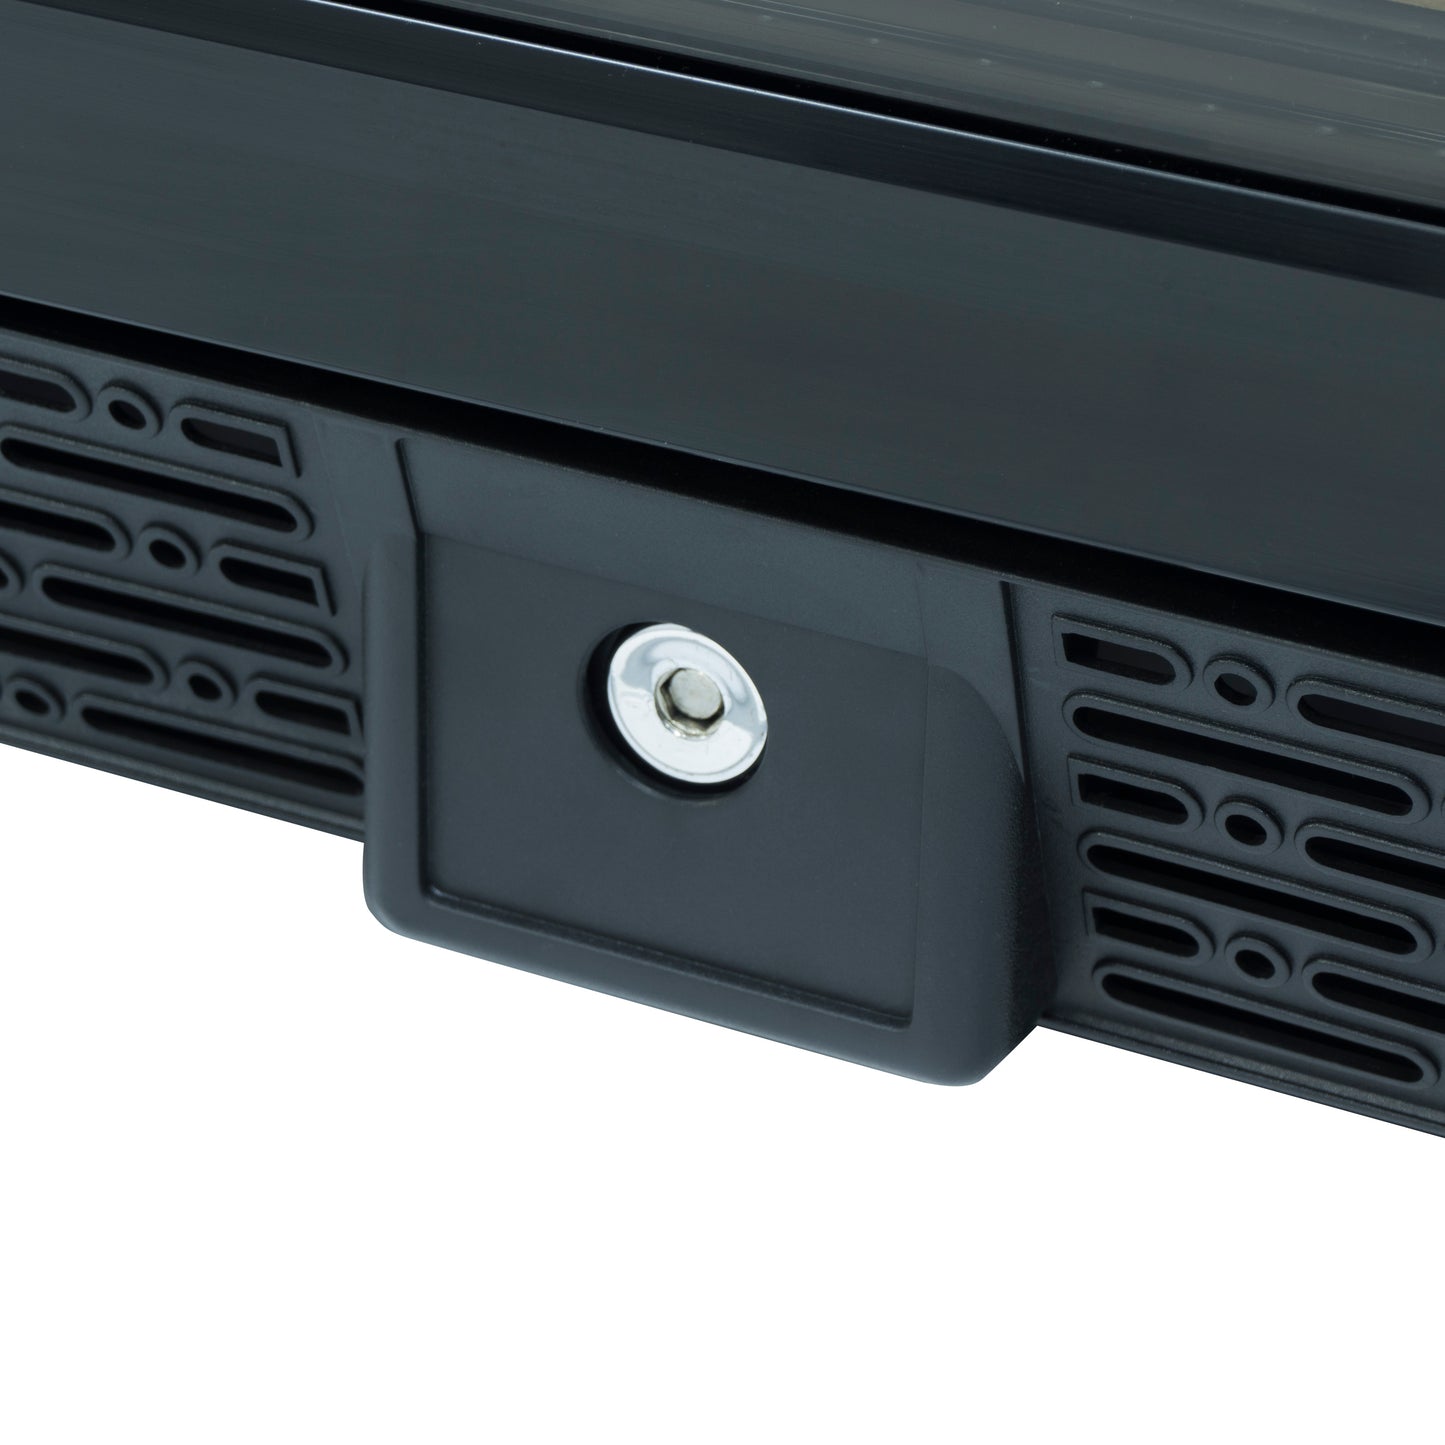 A close-up of a black dual temperature wine cooler with a stainless steel glass door.